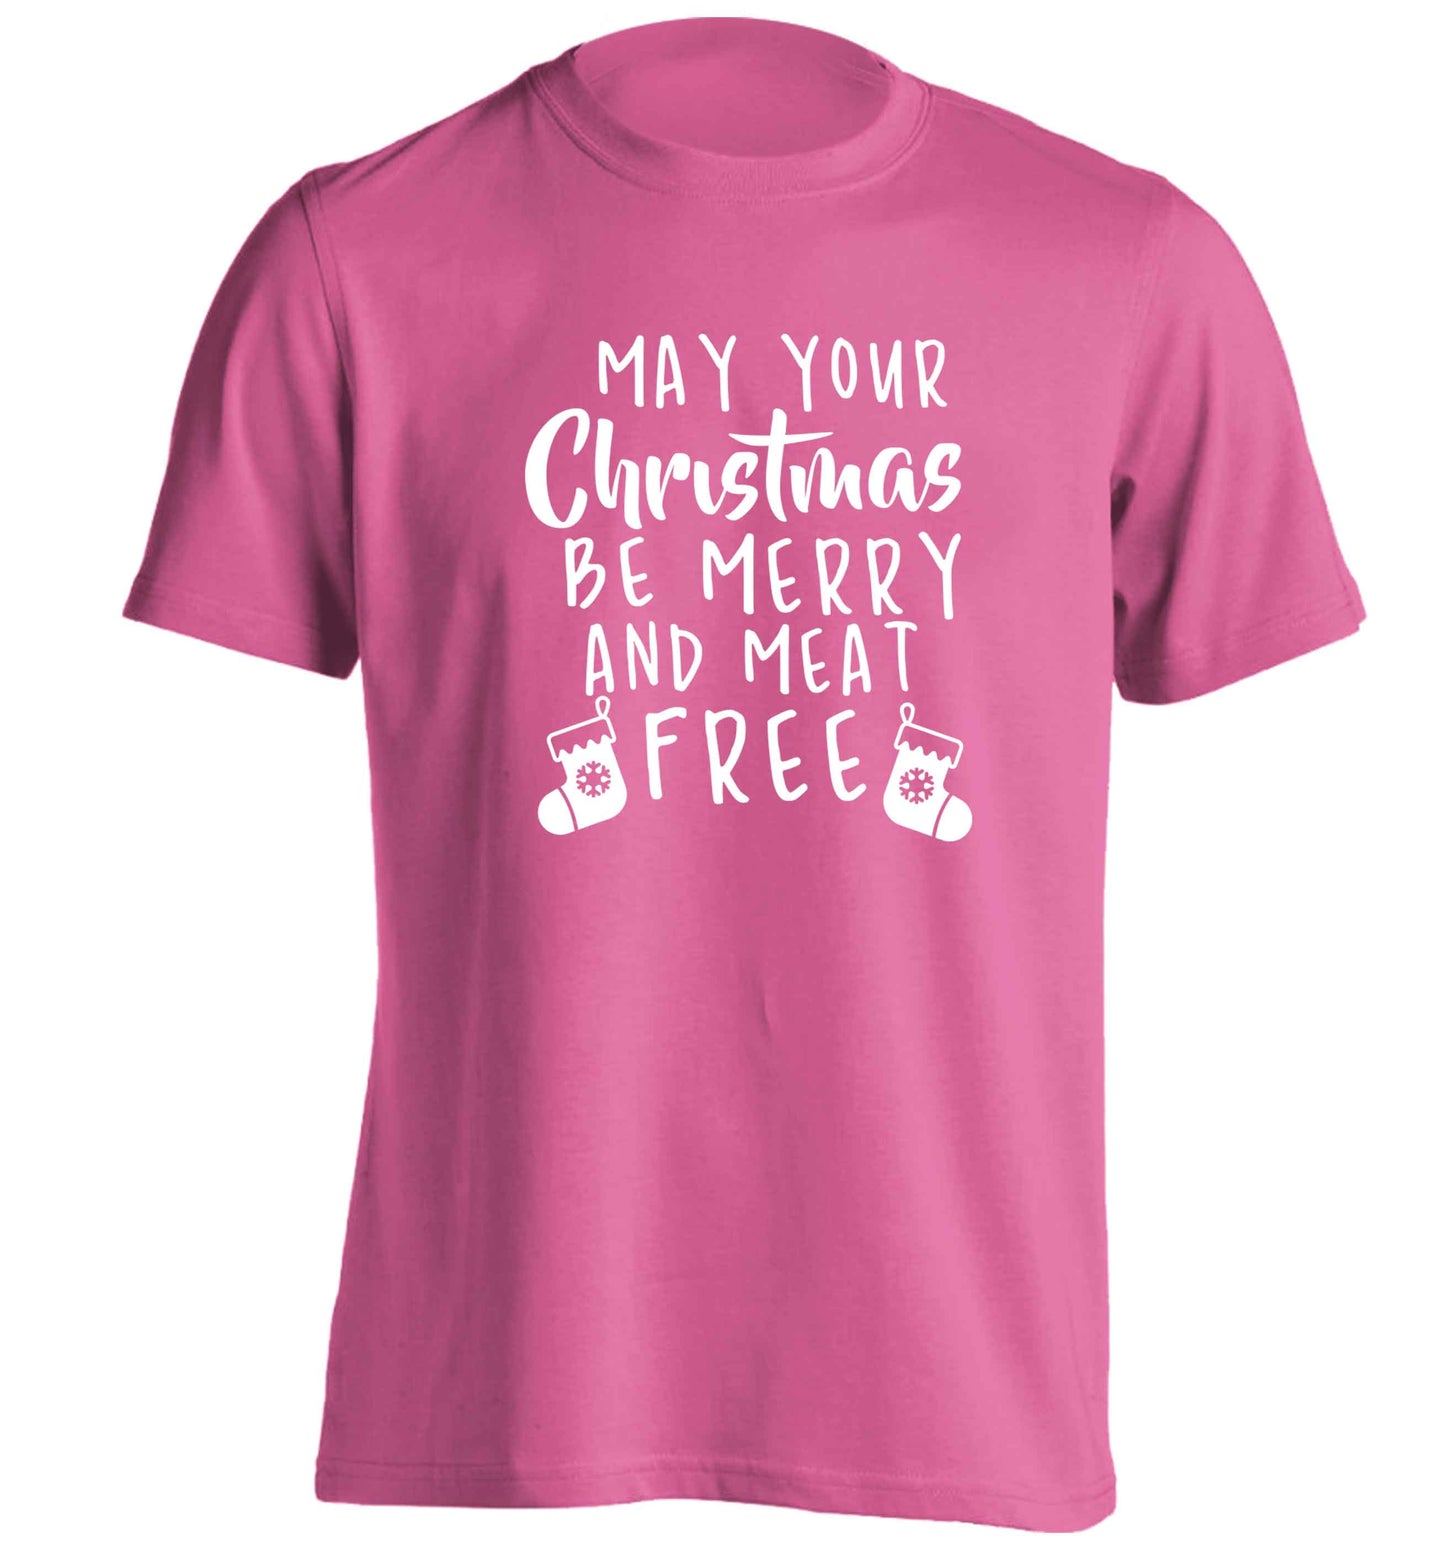 May your Christmas be merry and meat free adults unisex pink Tshirt 2XL